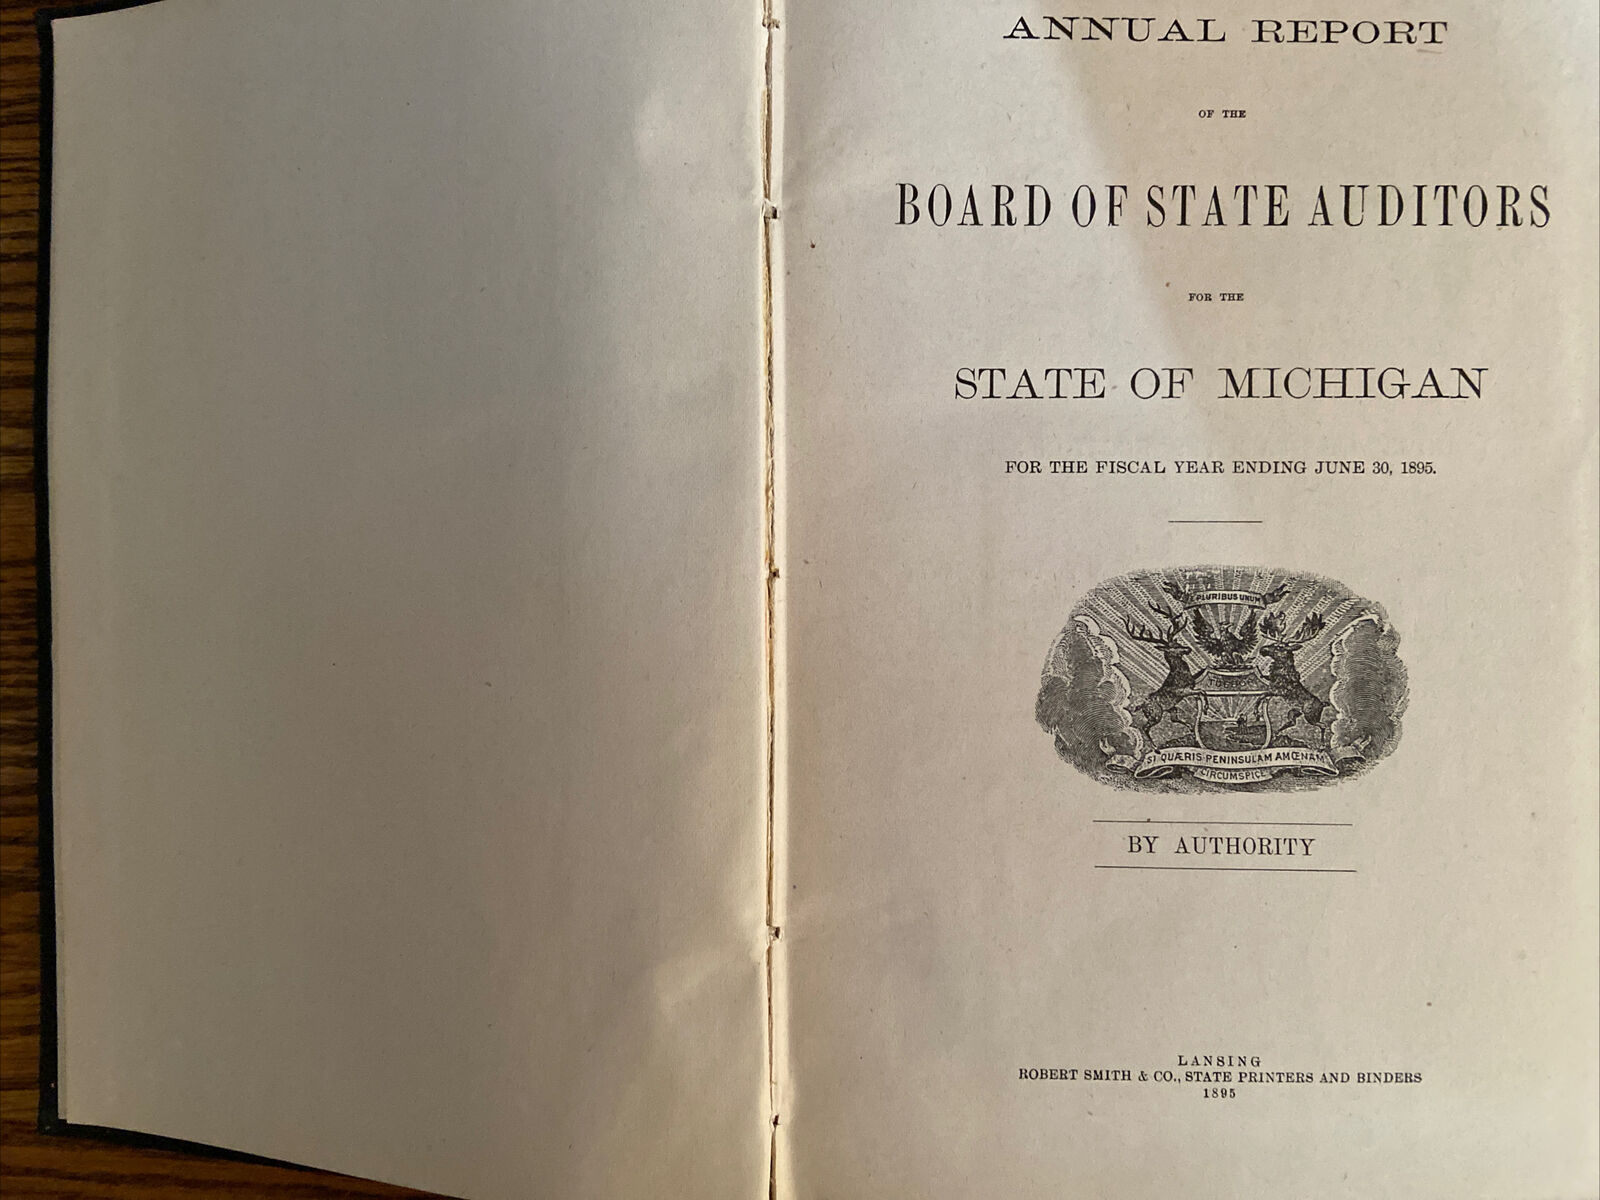 1895 ANNUAL REPORT OF THE BOARD OF STATE AUDITORS FOR STATE OF MICHIGAN